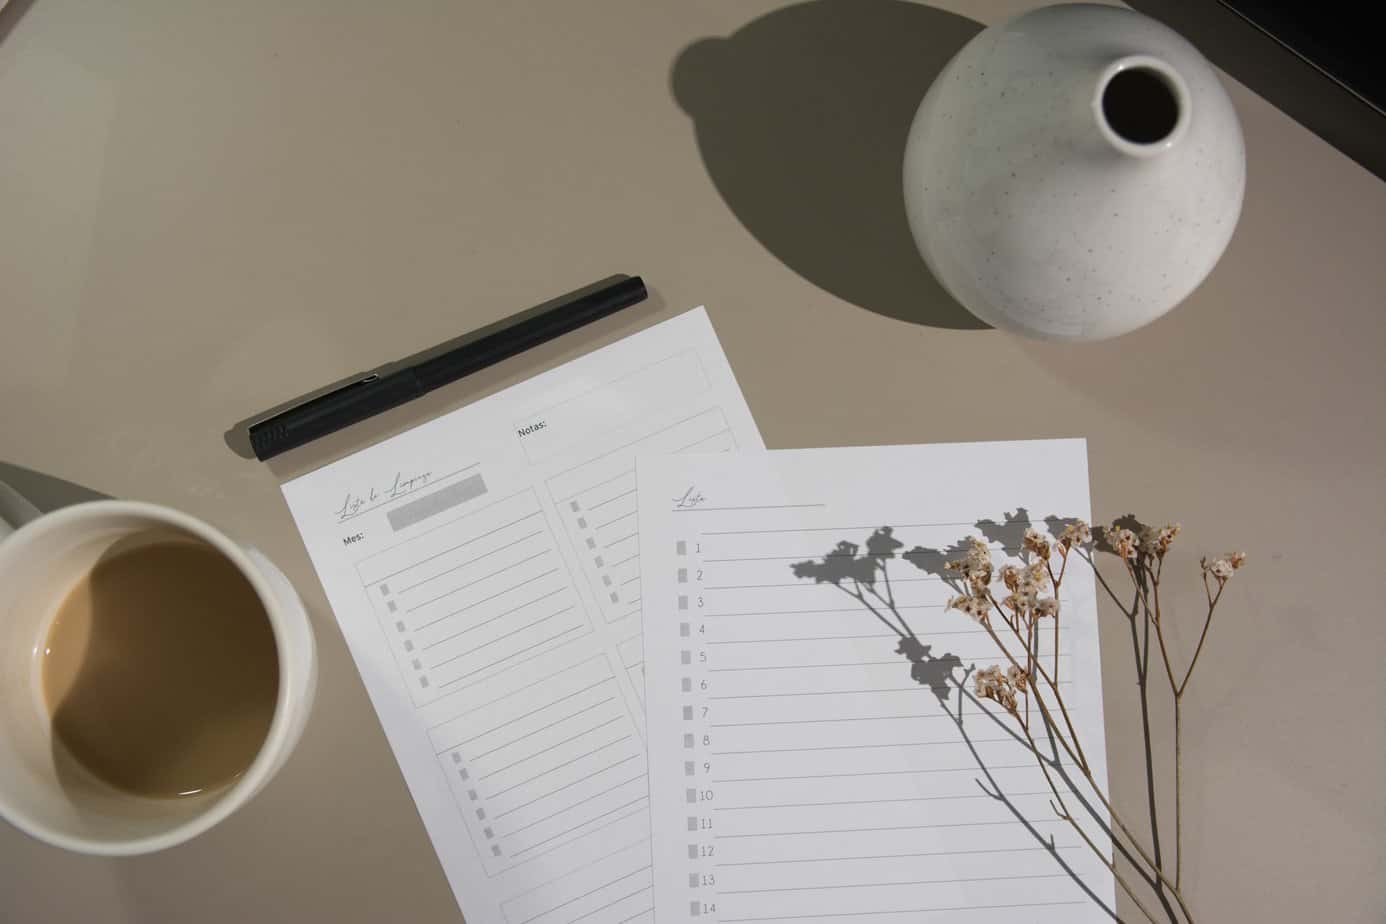 Papers and lists on a table with a vase and flowers | Mountainside Addiction Treatment Center